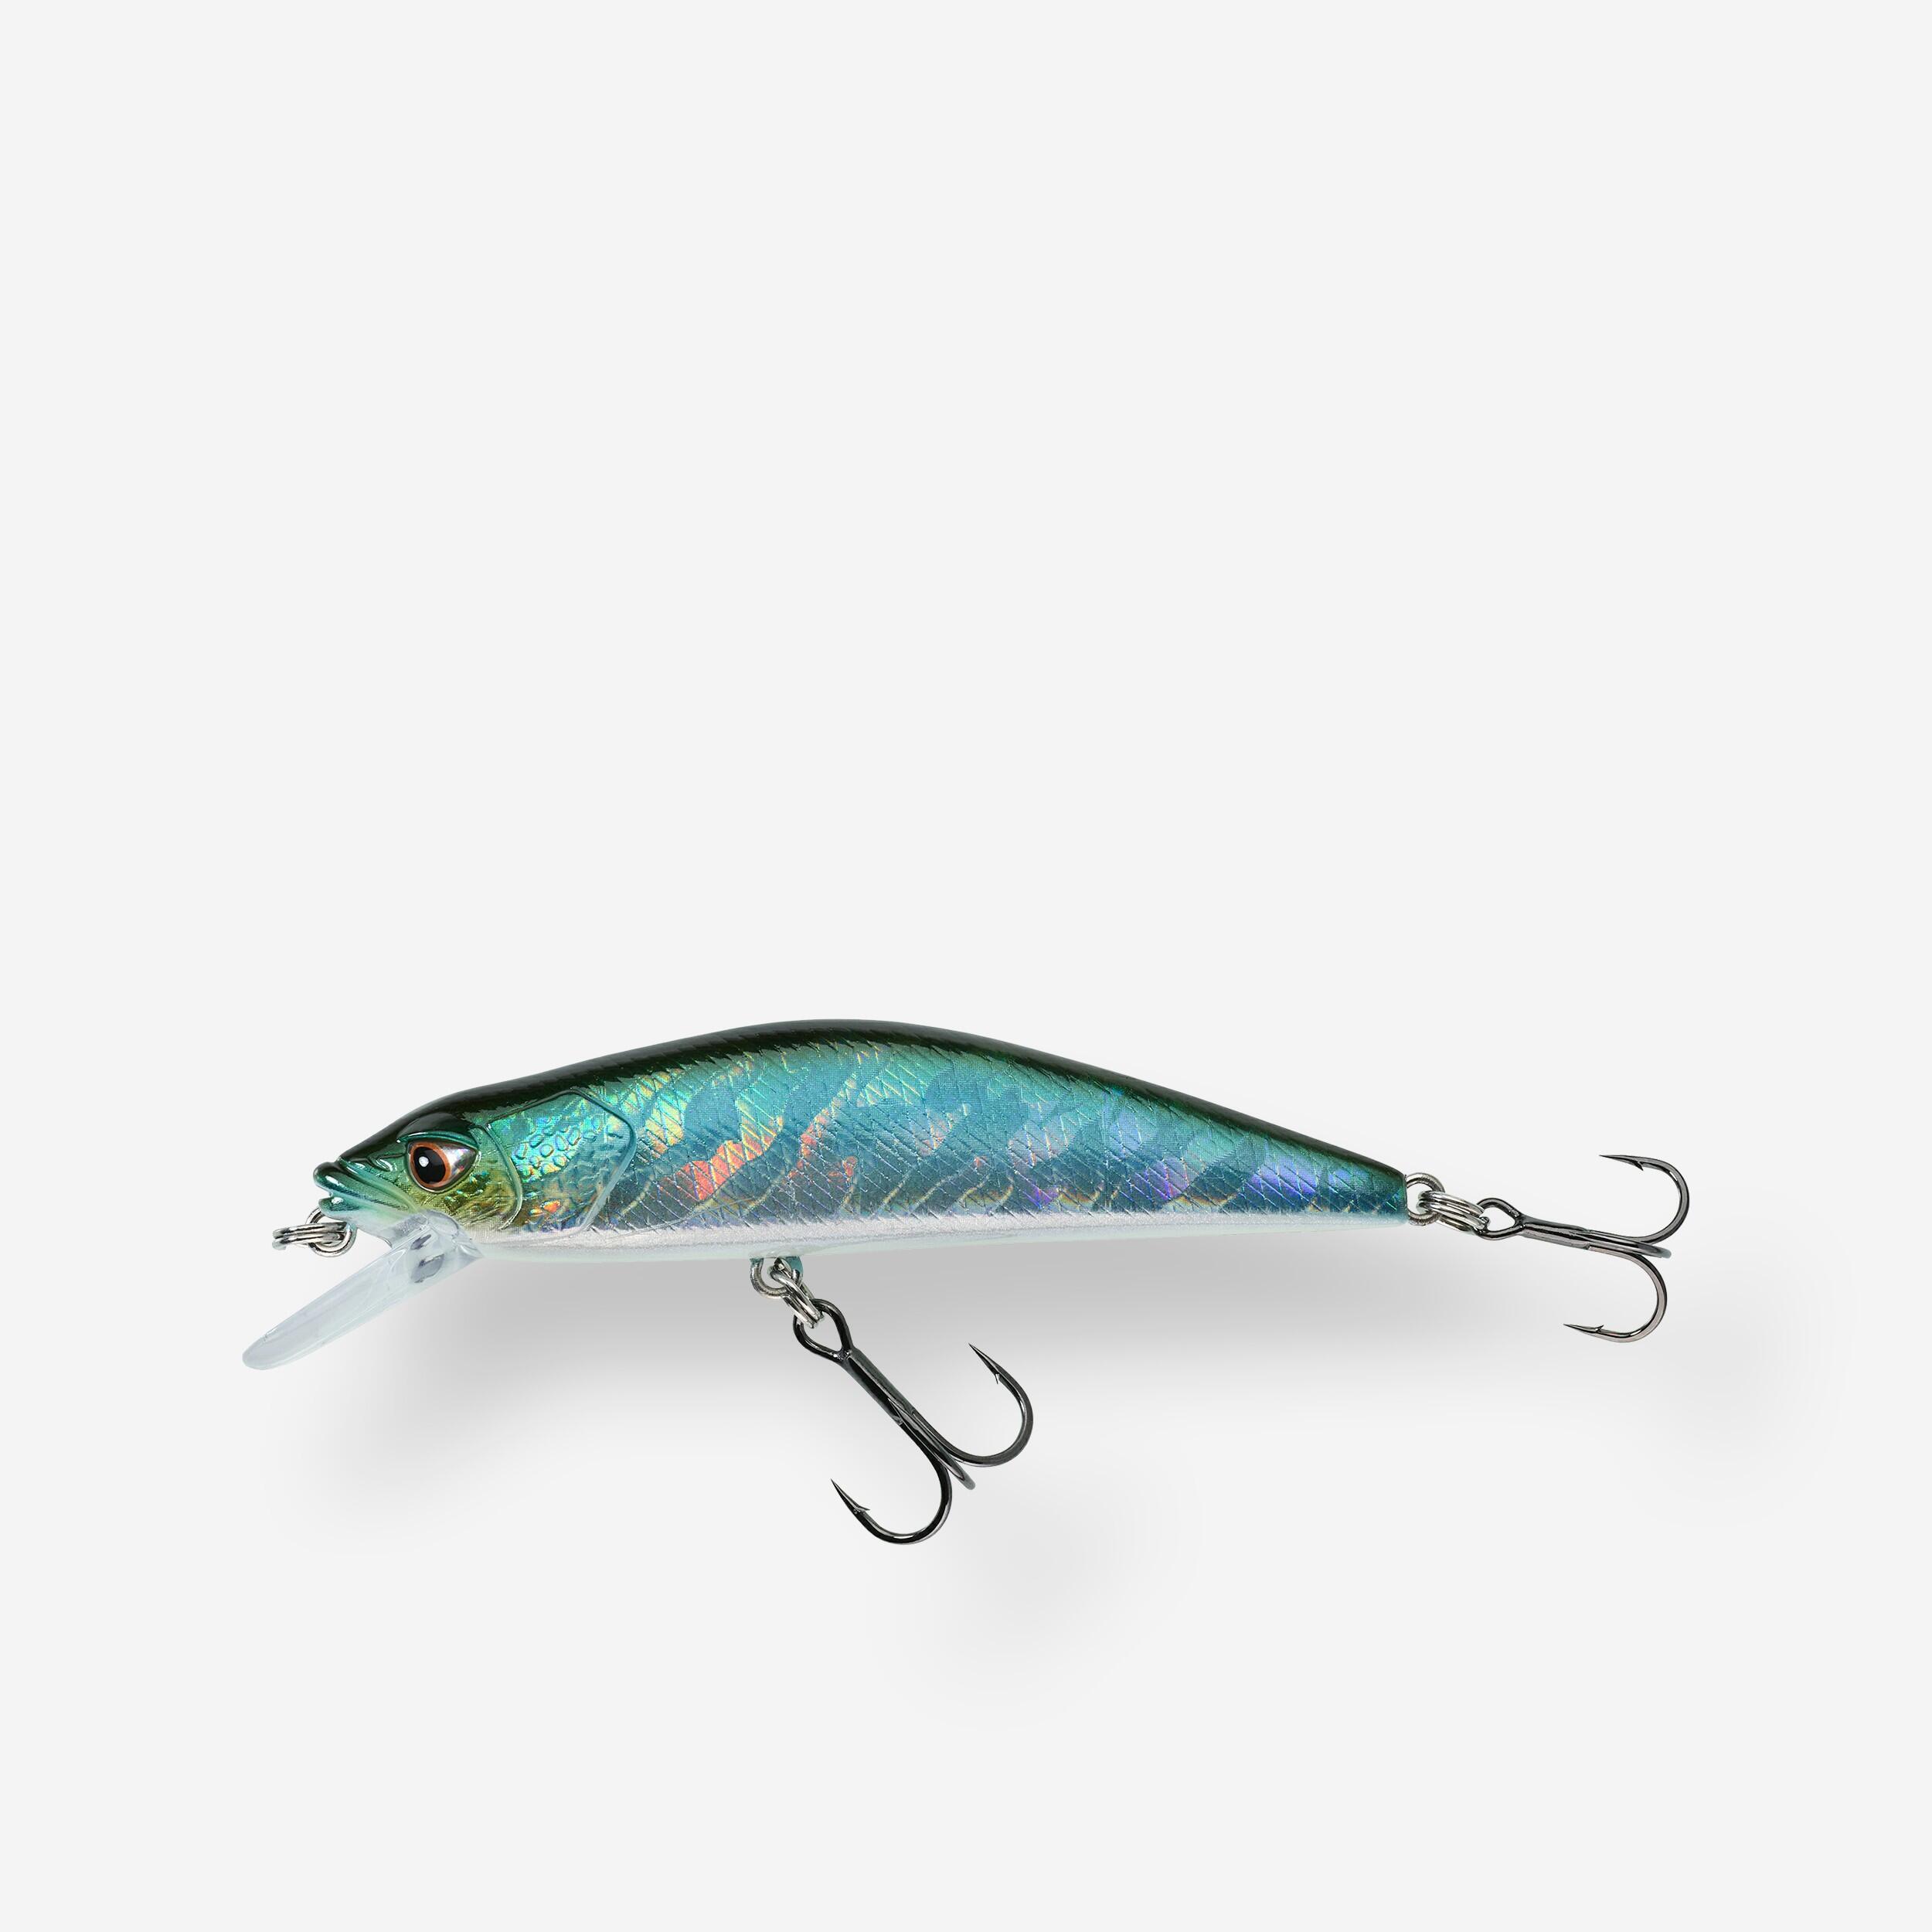 Caperlan Minnow Hard Lure For Trout Mnwfs US 85 Yamame - One Size